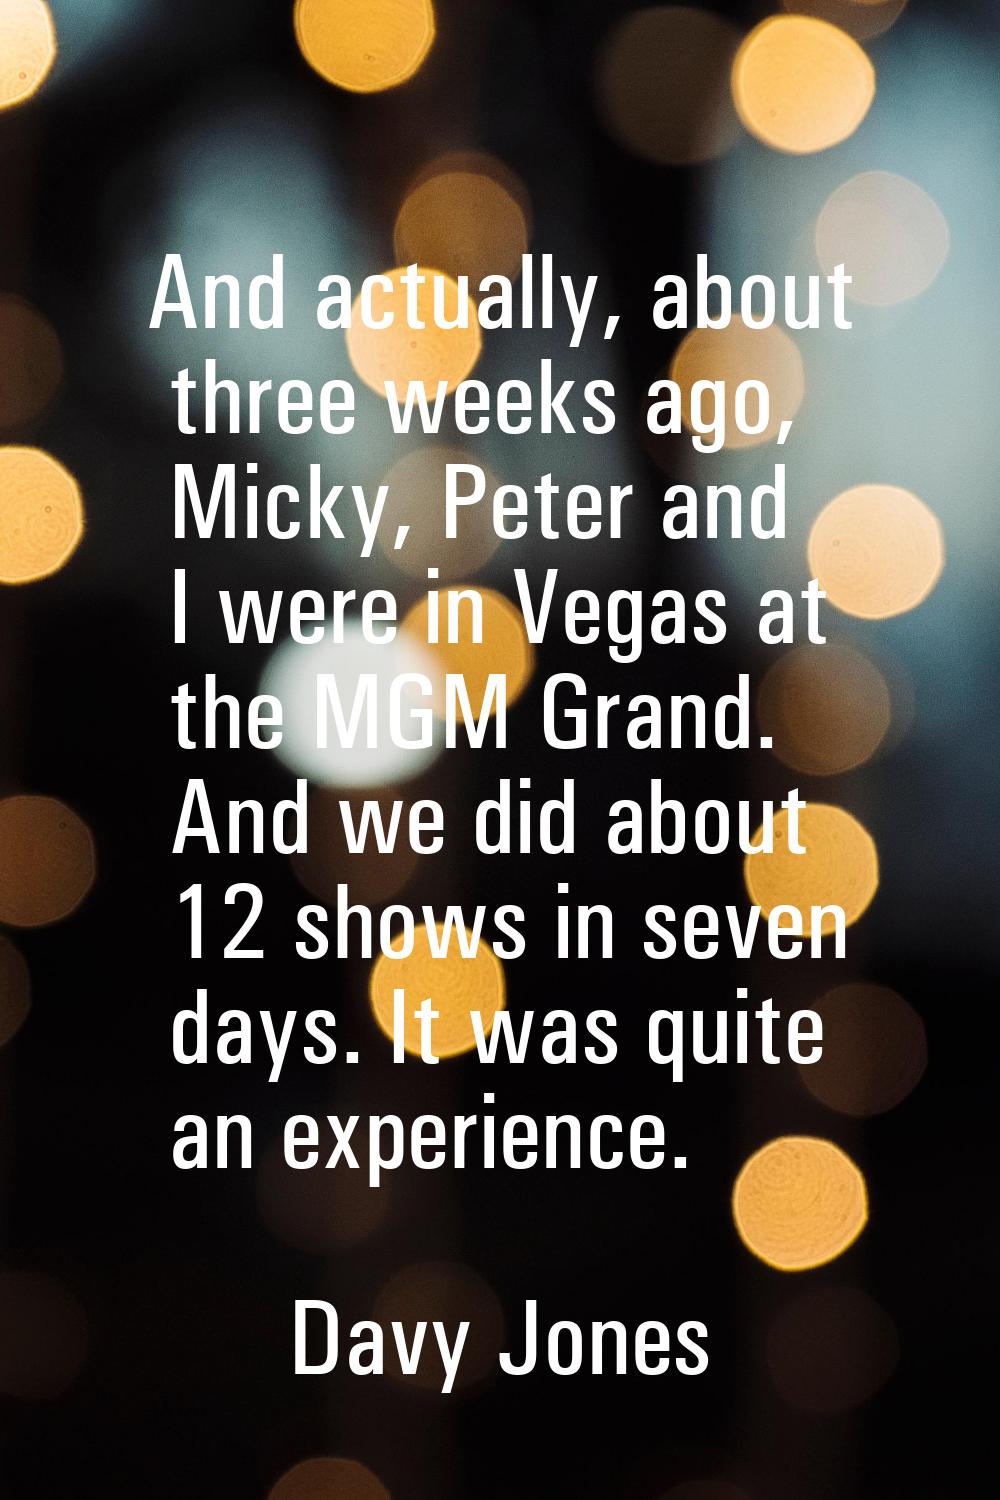 And actually, about three weeks ago, Micky, Peter and I were in Vegas at the MGM Grand. And we did 